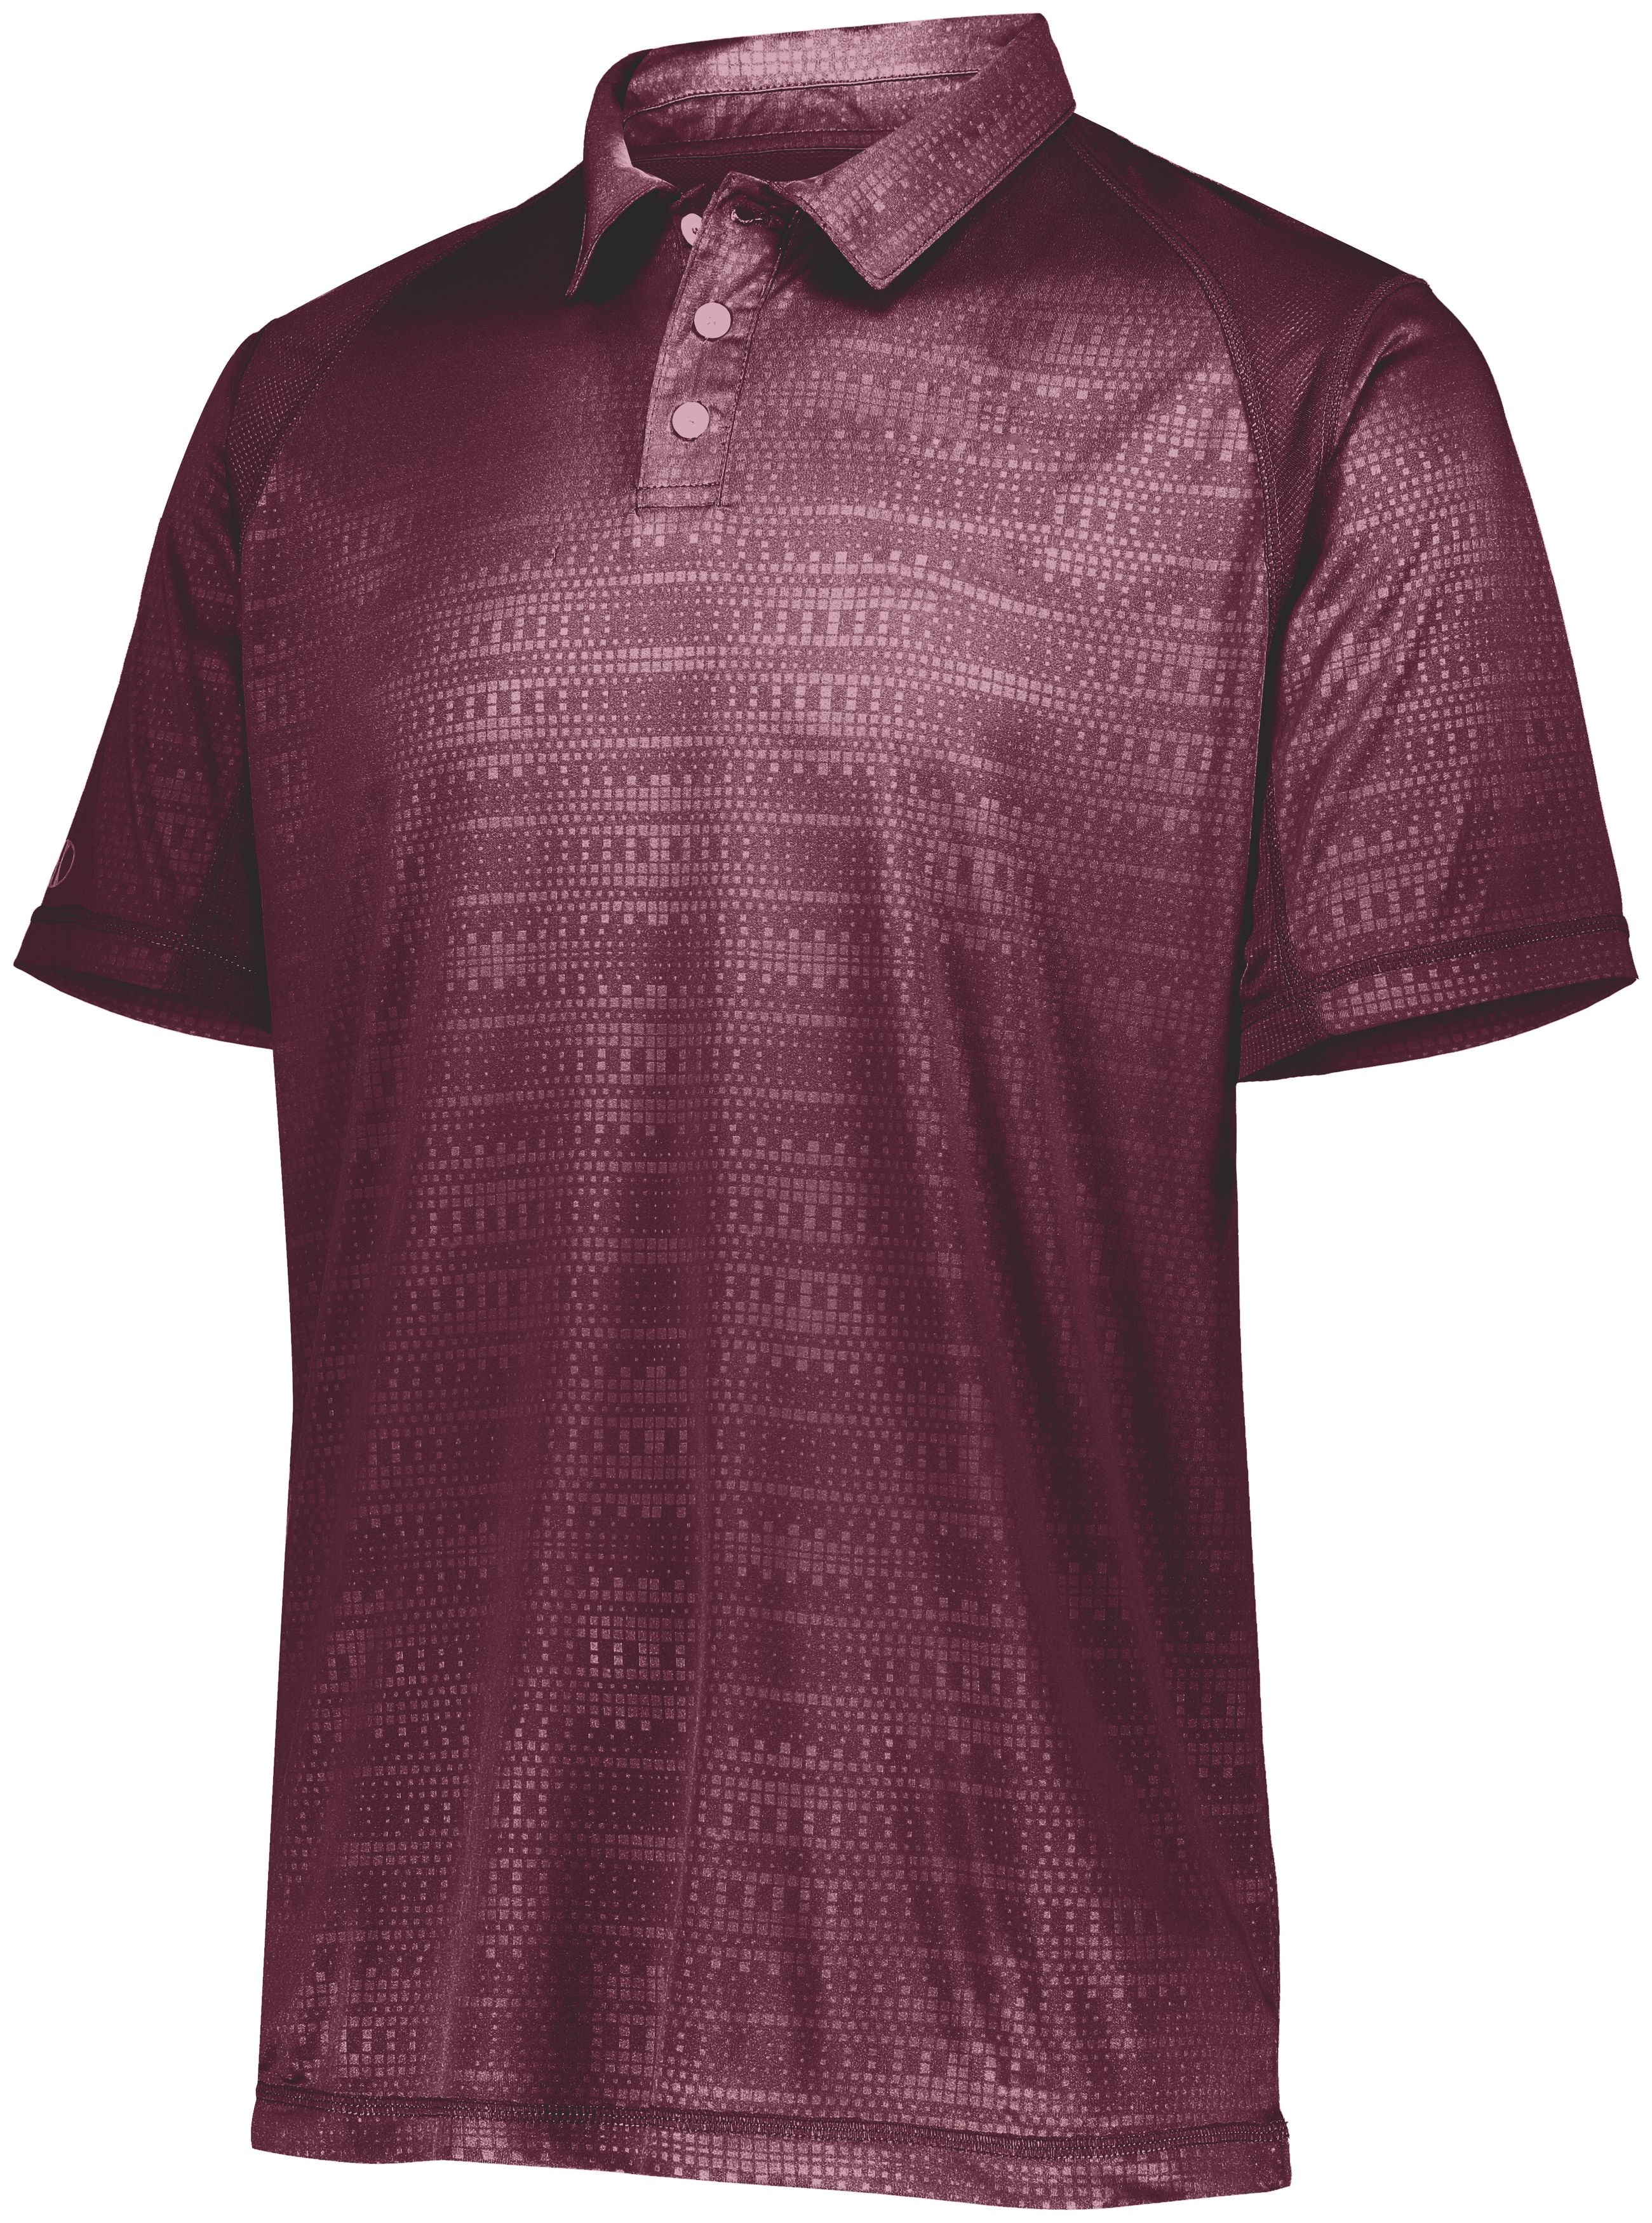 Holloway Converge Polo in Maroon (Hlw)  -Part of the Adult, Adult-Polos, Polos, Holloway, Shirts, Converge-Collection product lines at KanaleyCreations.com